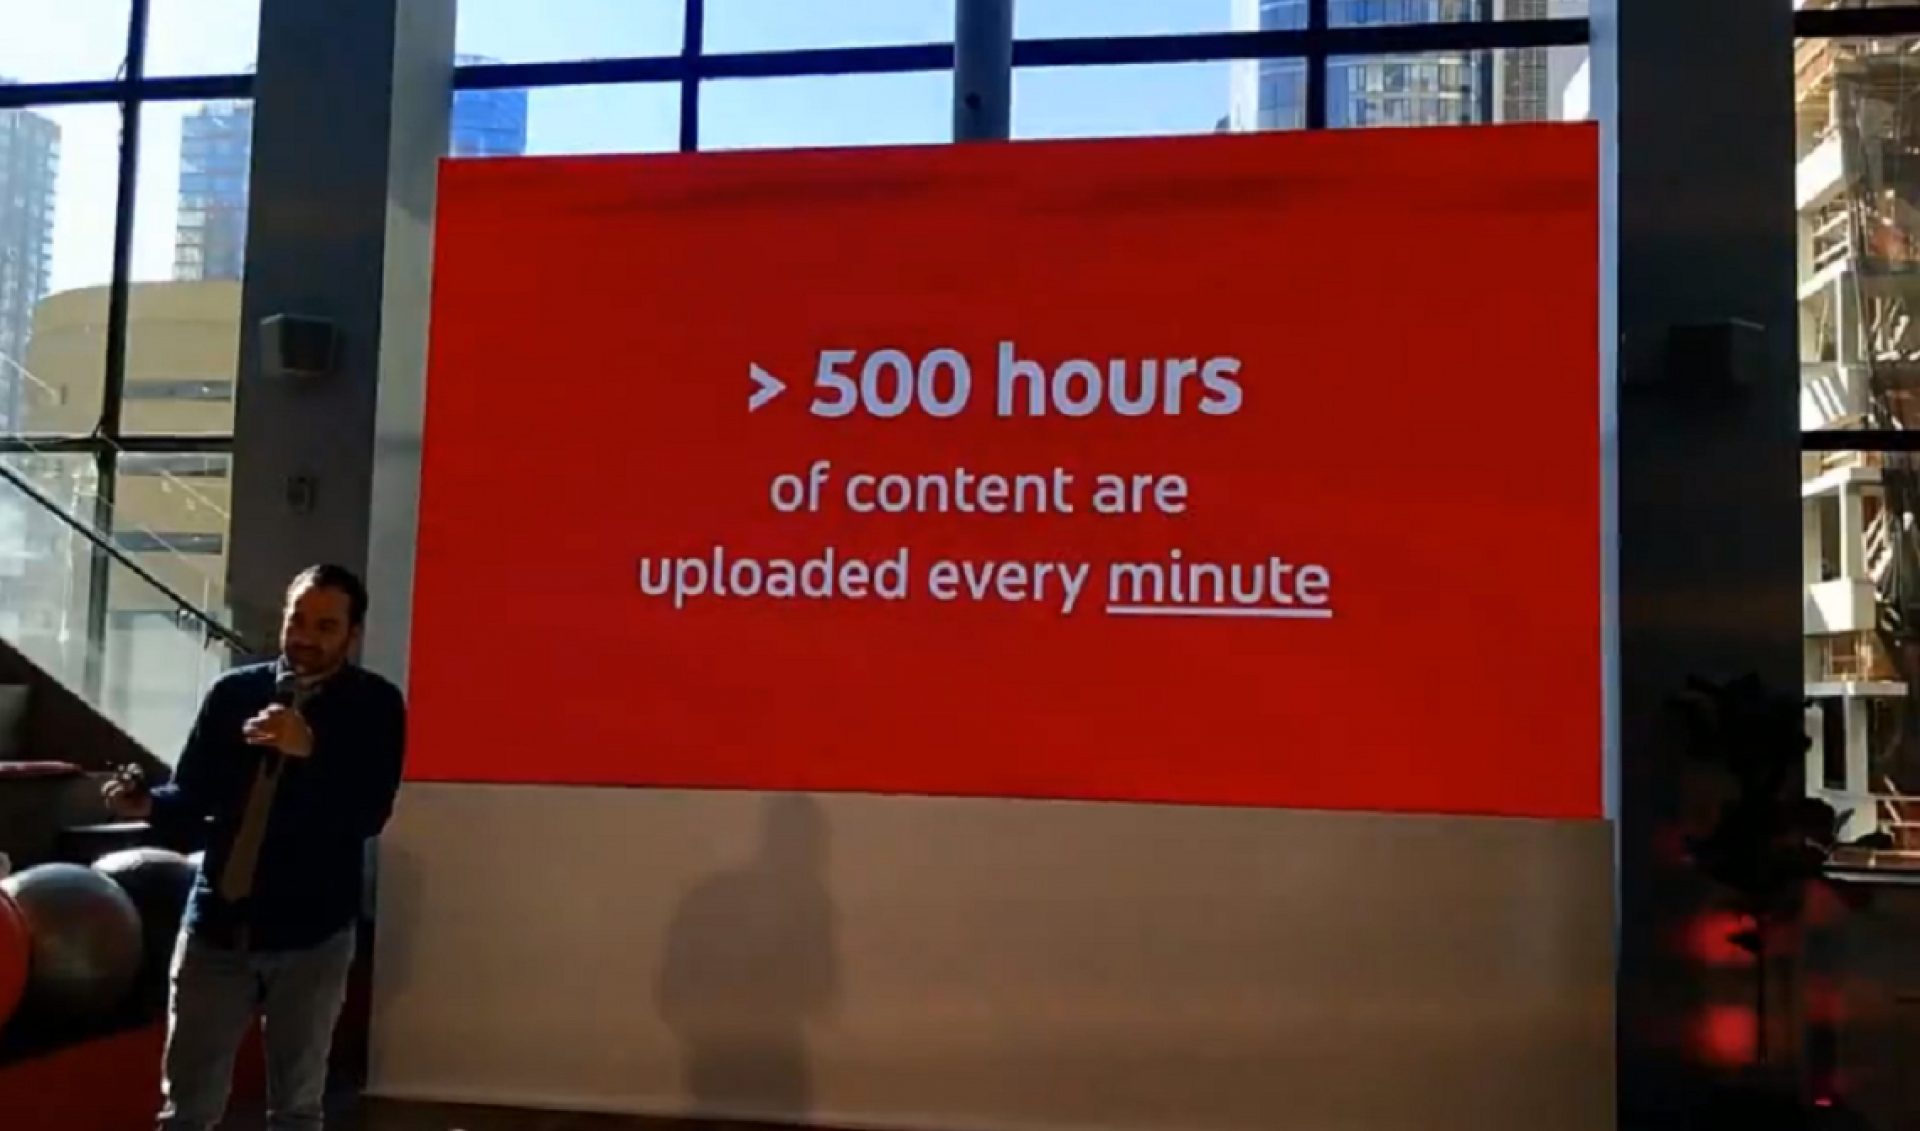 More Than 500 Hours Of Content Are Now Being Uploaded To YouTube Every Minute